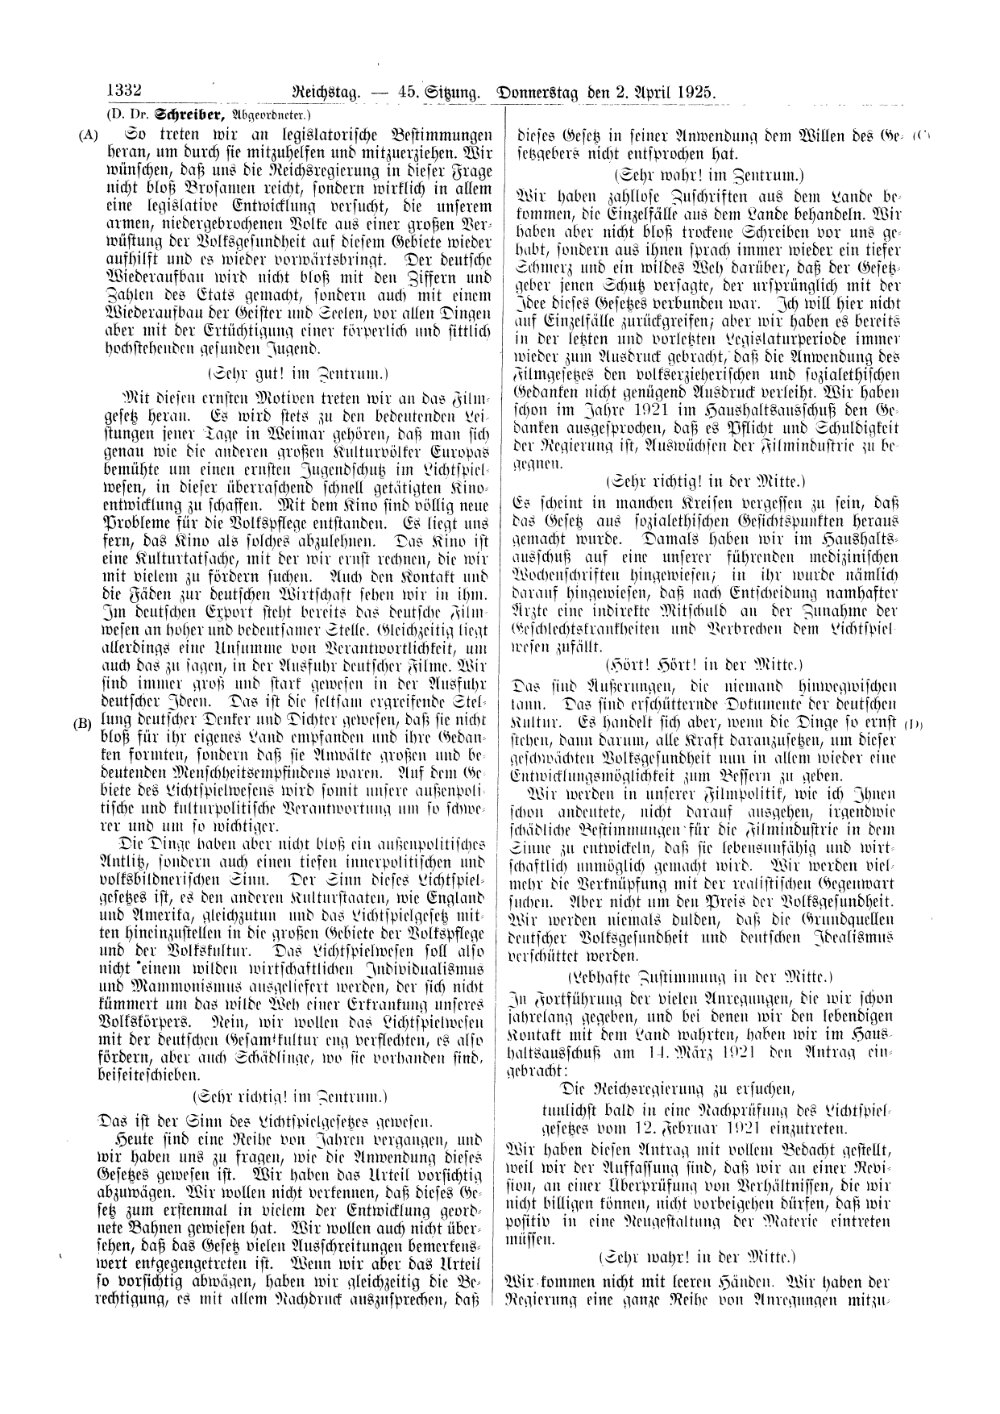 Scan of page 1332